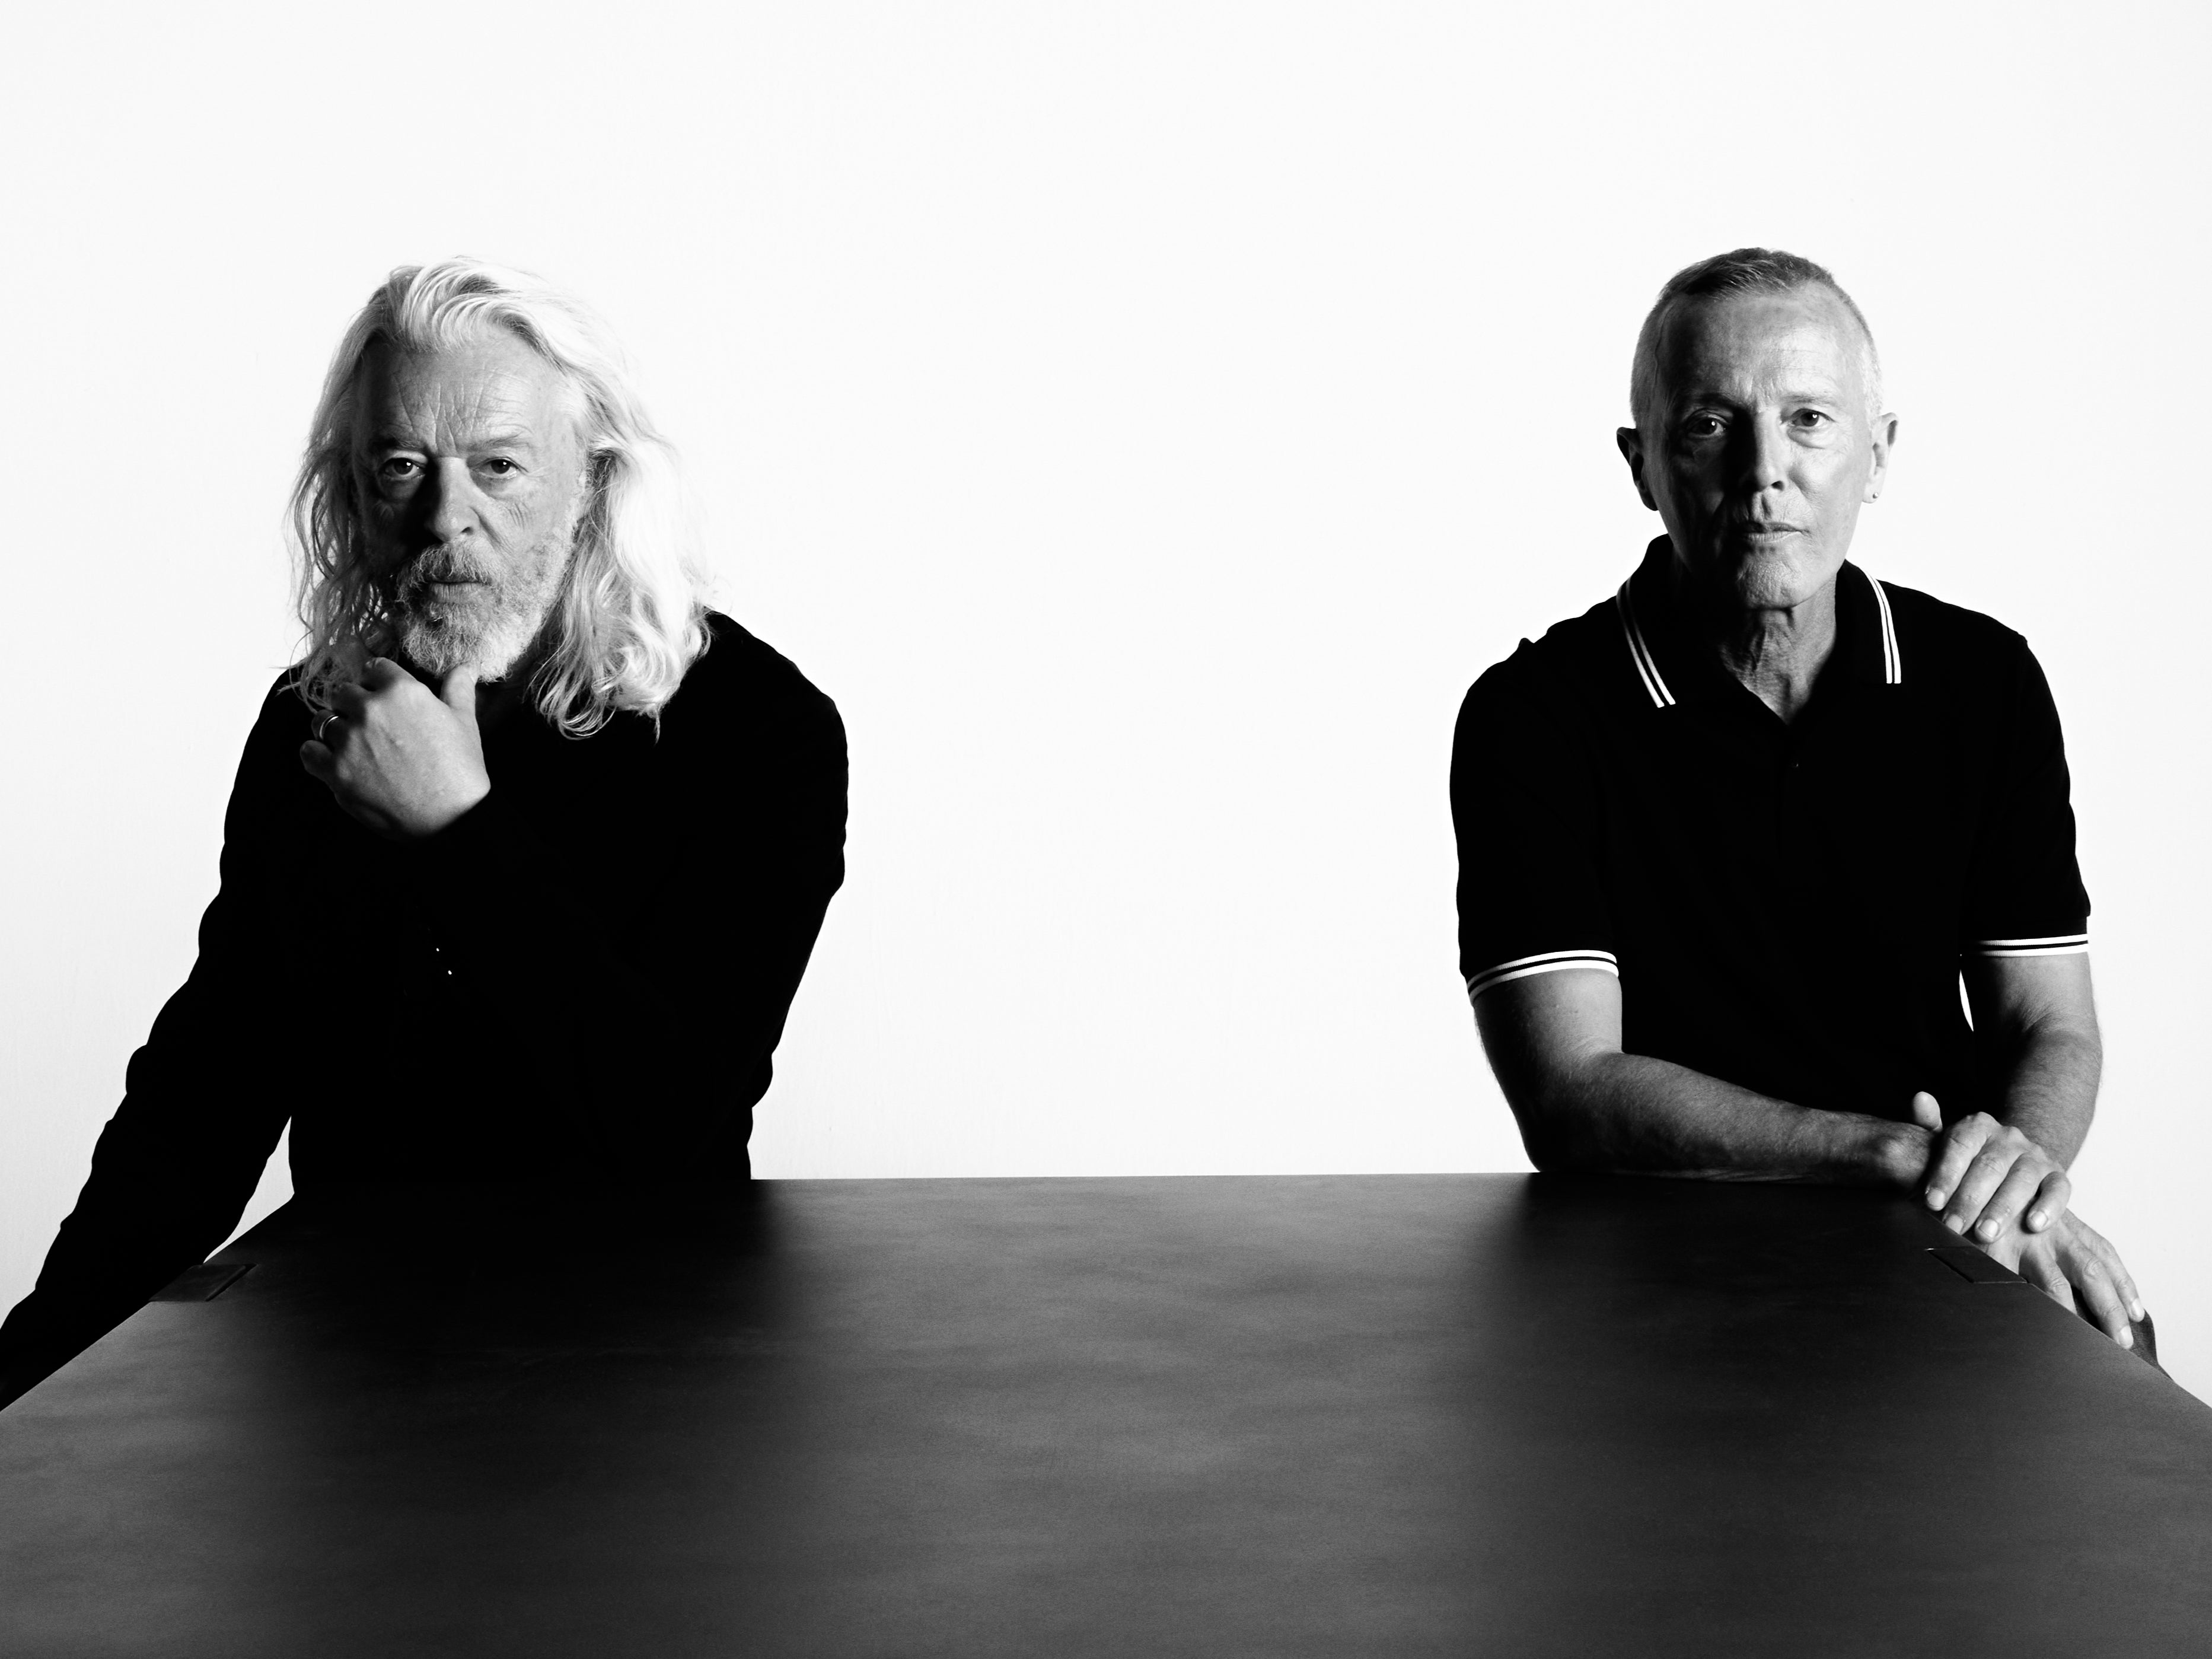 Music as therapy: on the couch with Roland Orzabal (left) and Curt Smith